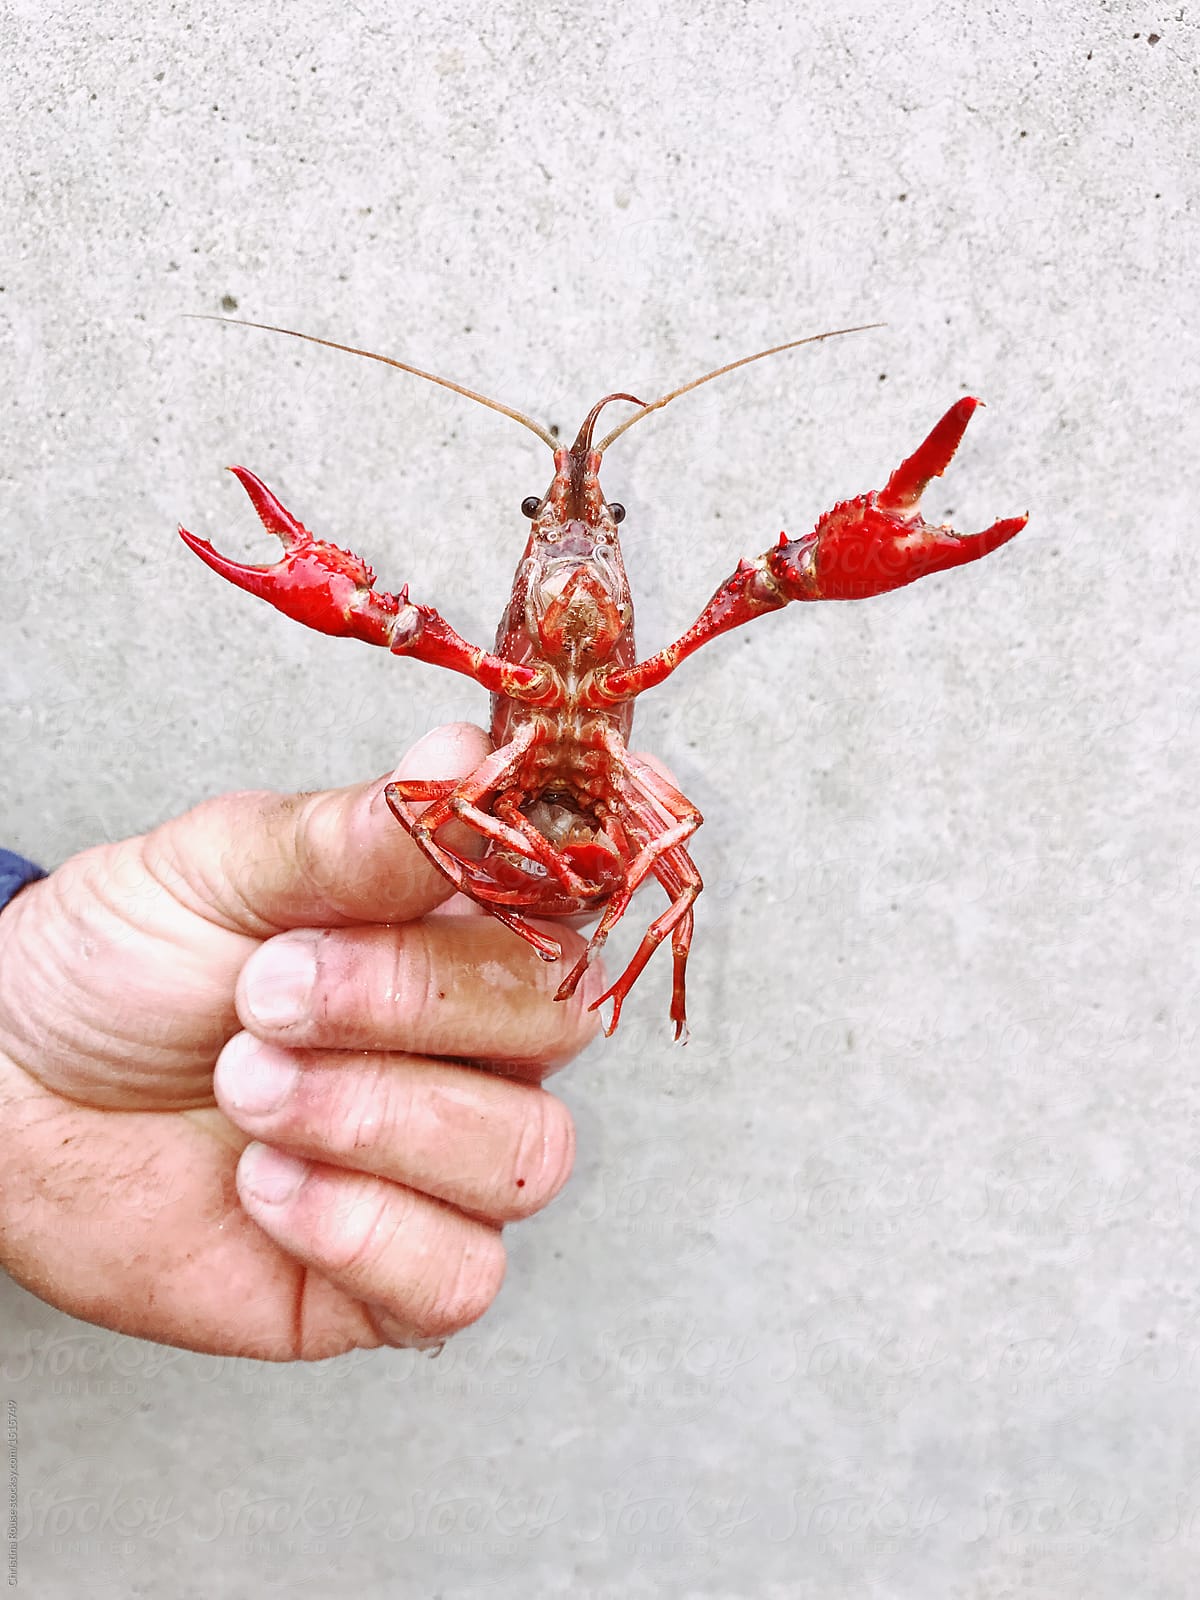 Man's Hand Holding A Crawfish by Stocksy Contributor Christina